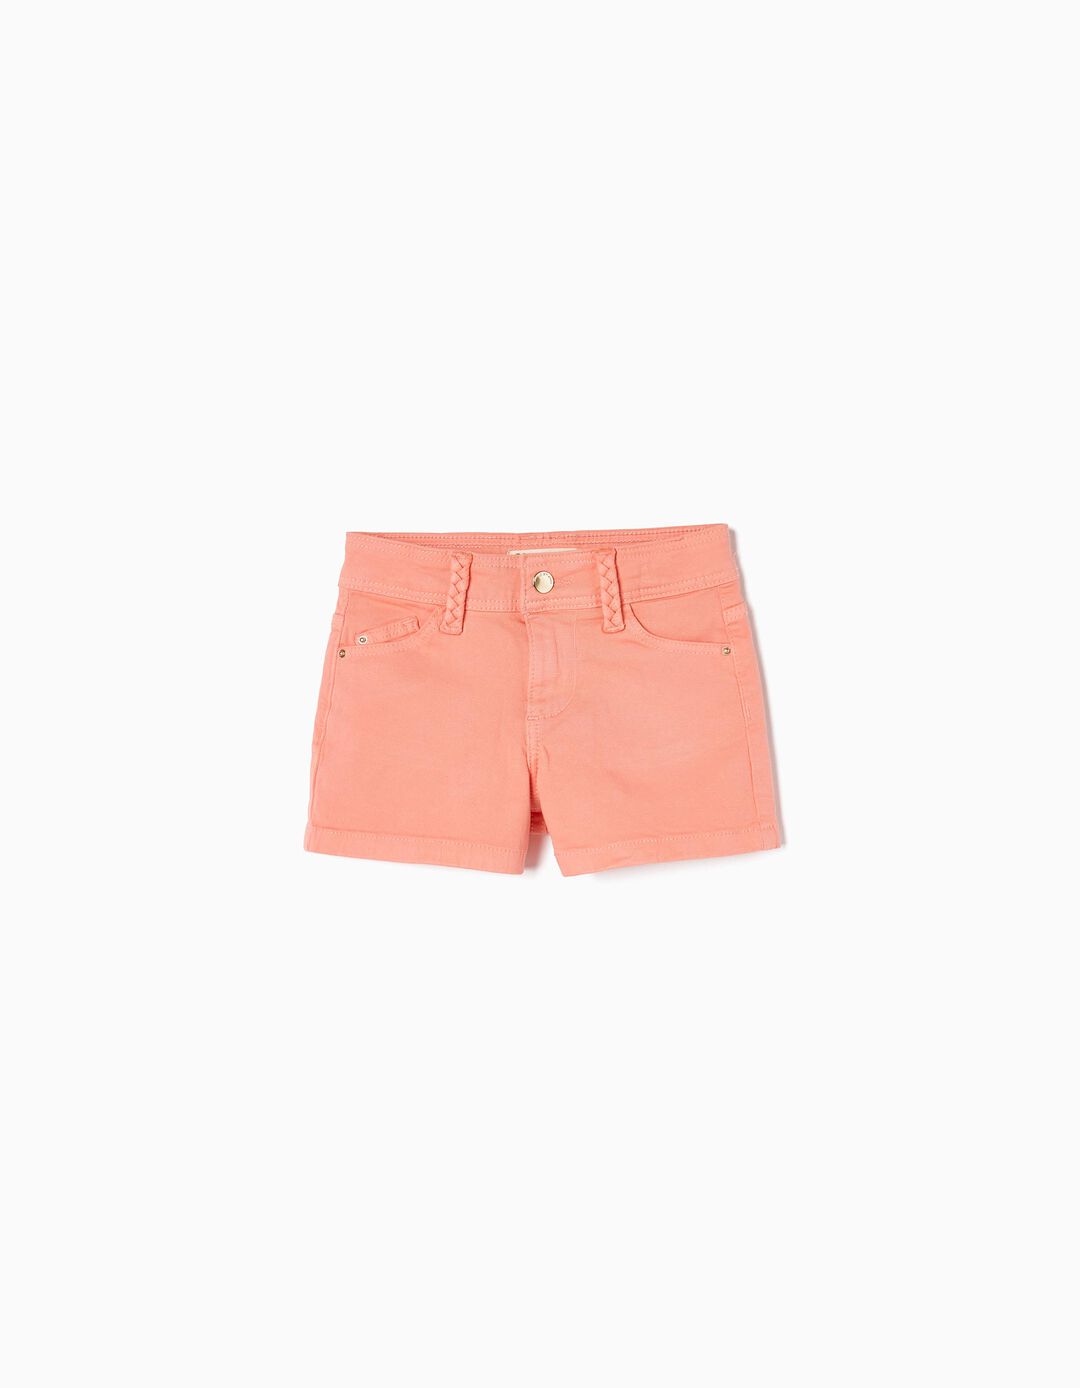 Cotton Twill Shorts for Girls, Coral